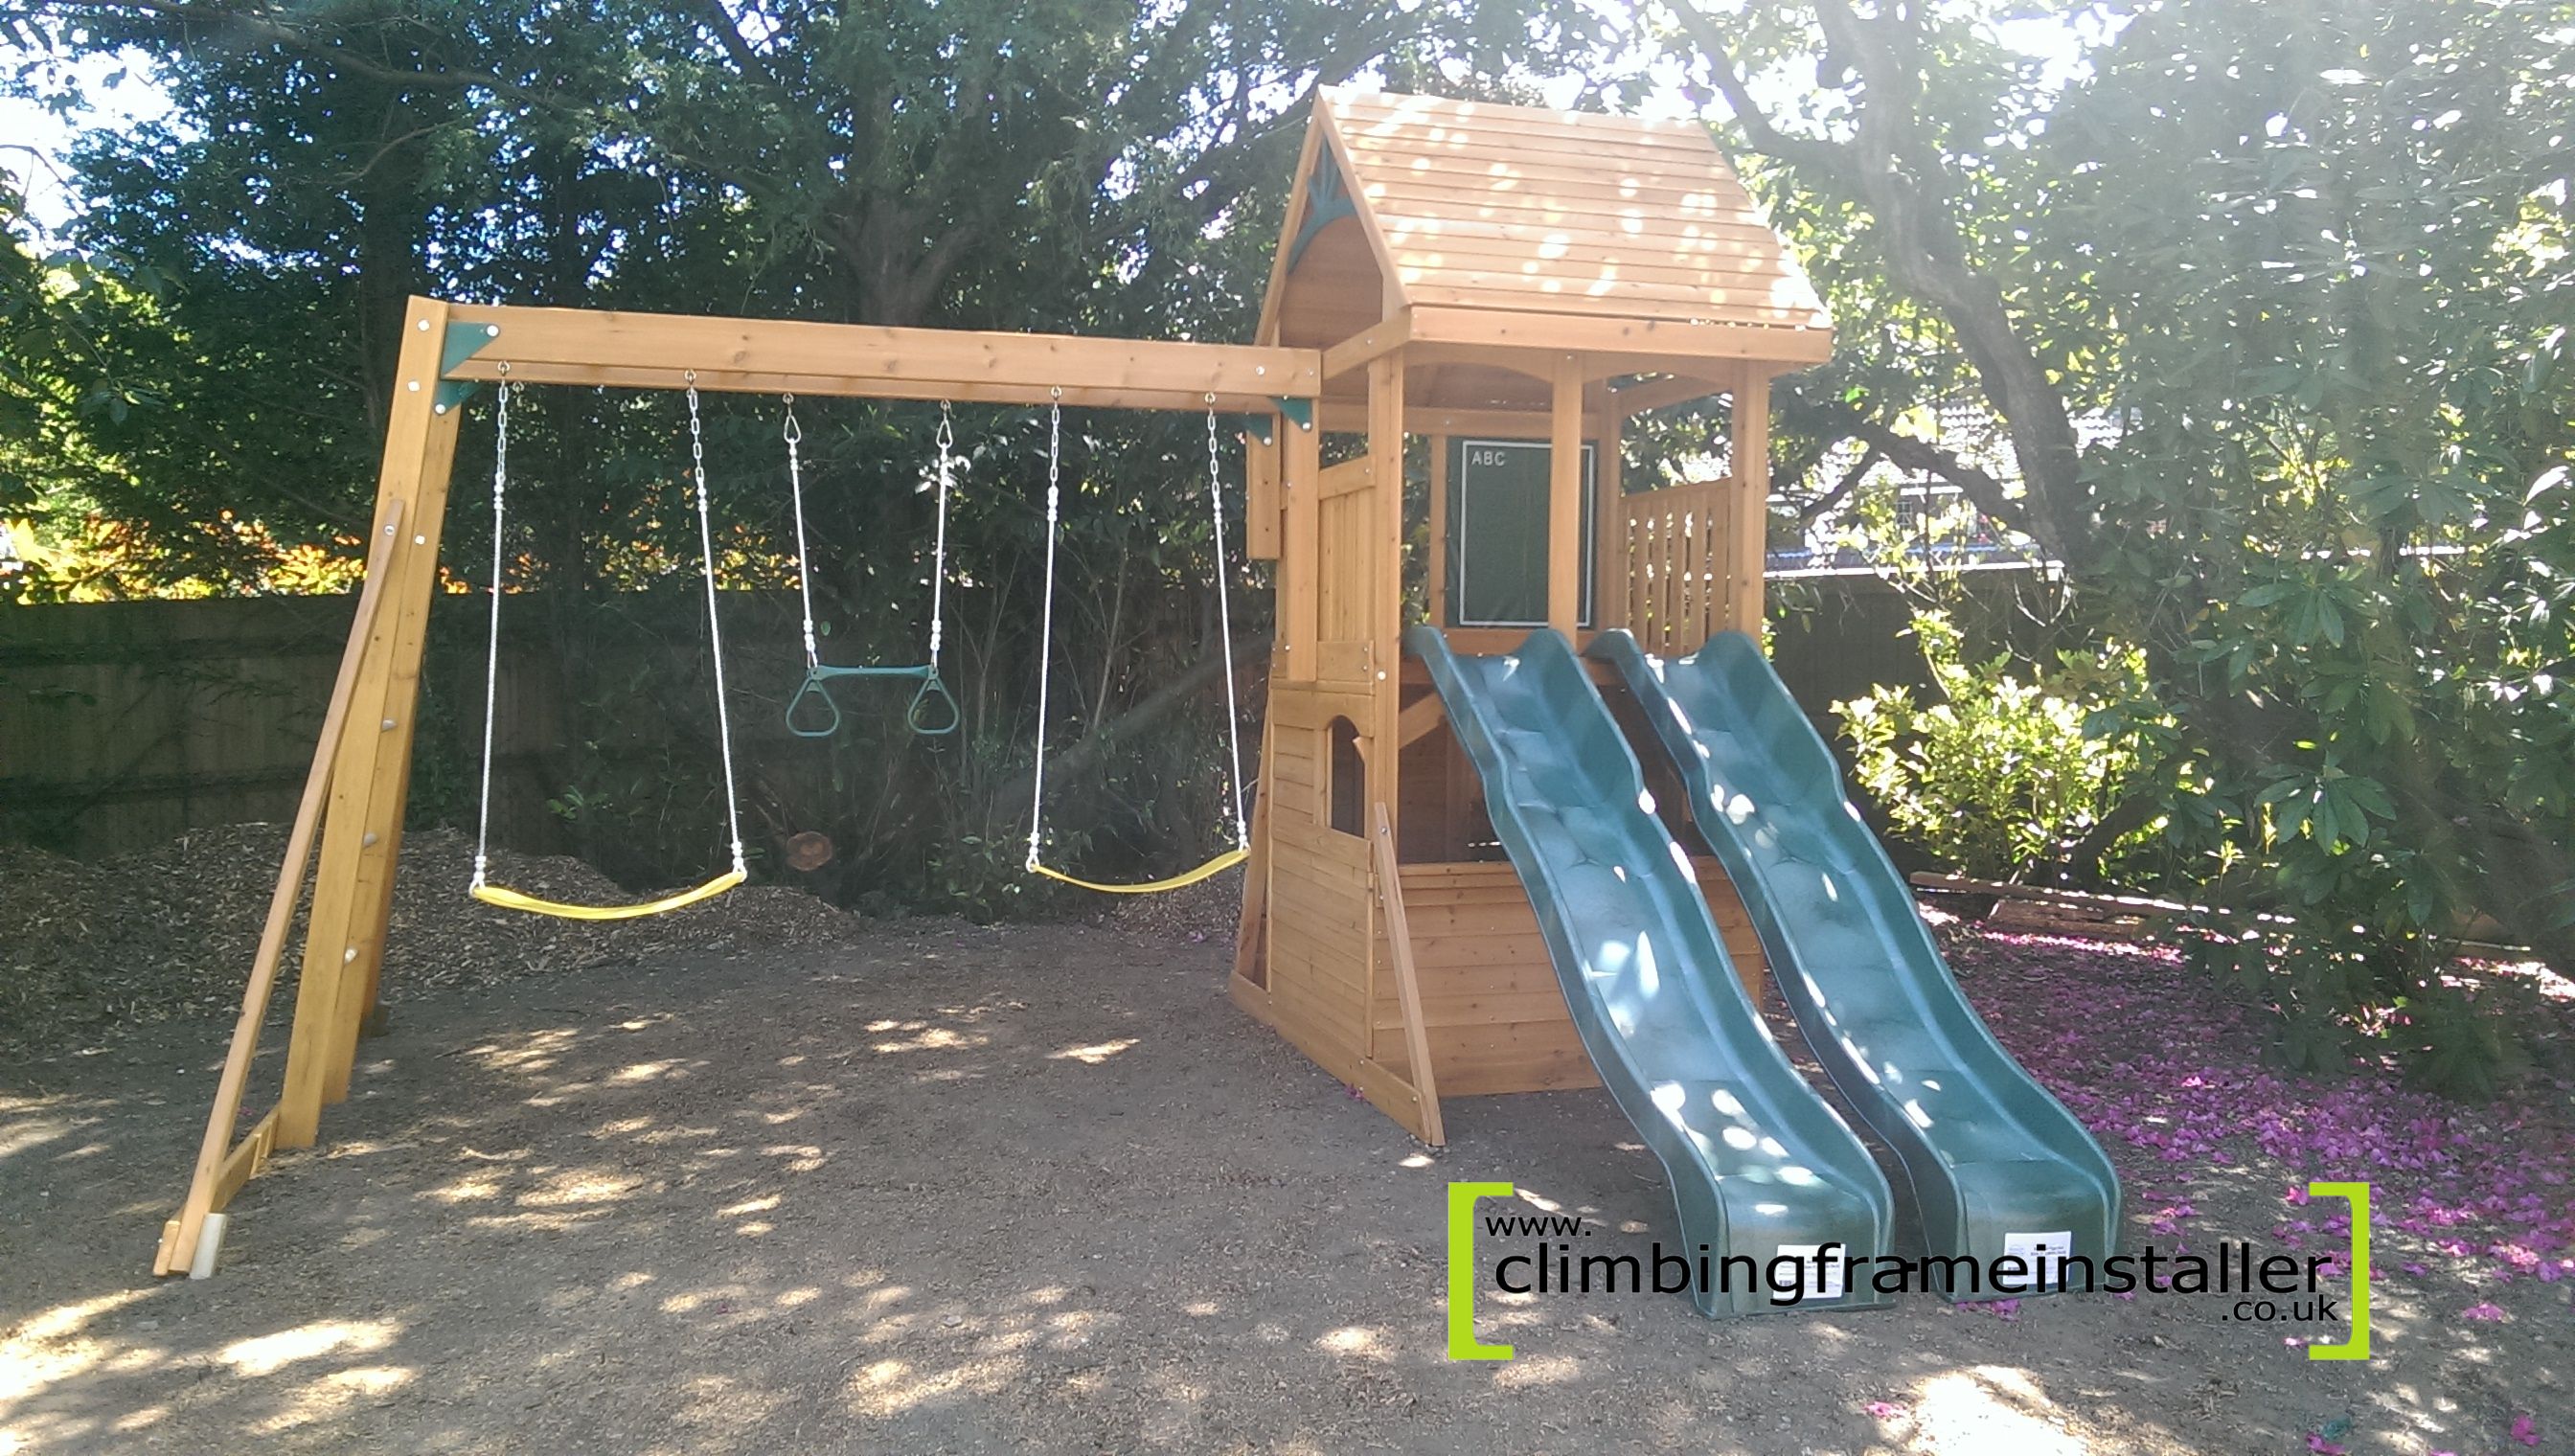 The Selwood Products Duke Climbing Frame